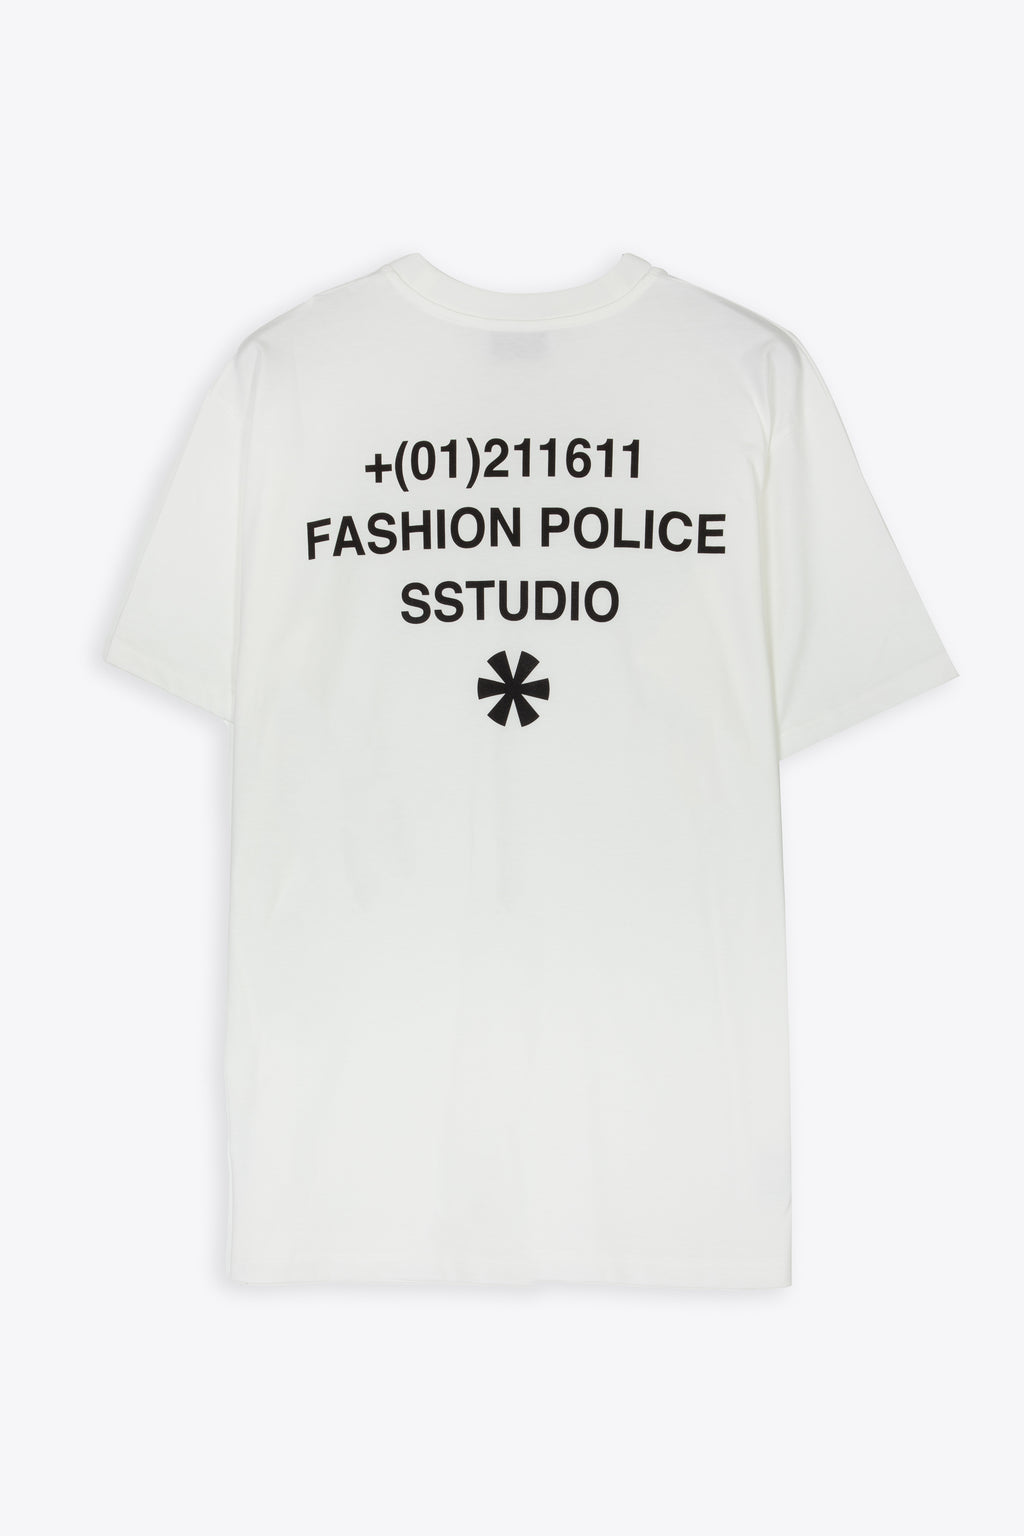 alt-image__Off-white-cotton-t-shirt-with-back-print---Fashion-police-tee